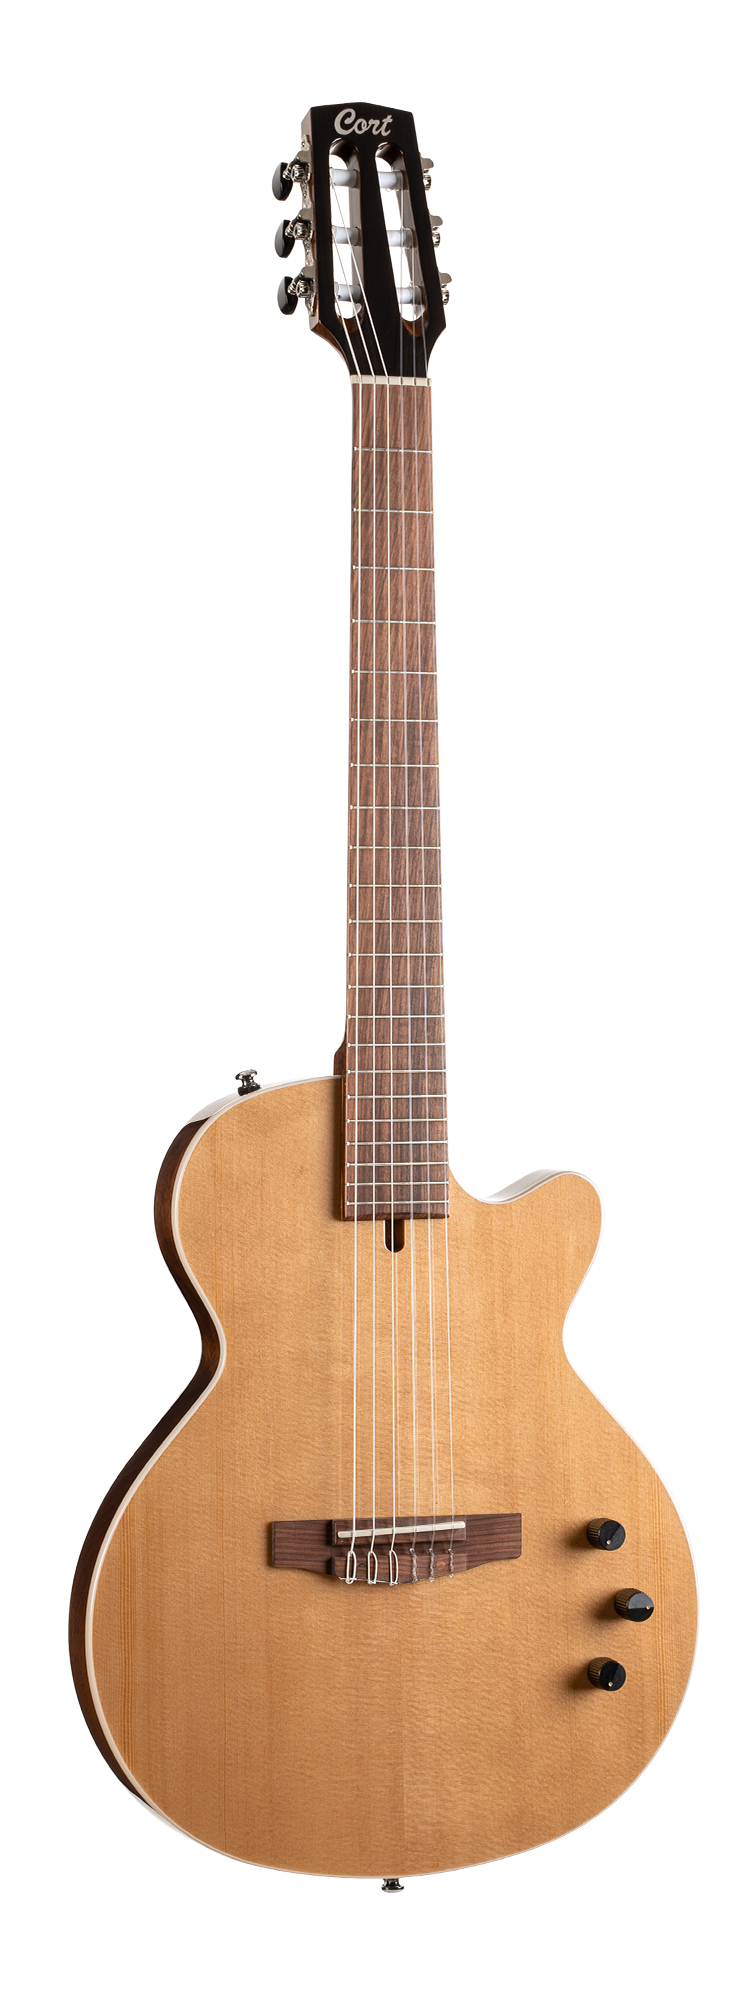 Cort Sunset Nylectric II Electro-Classical Guitar - Natural Glossy